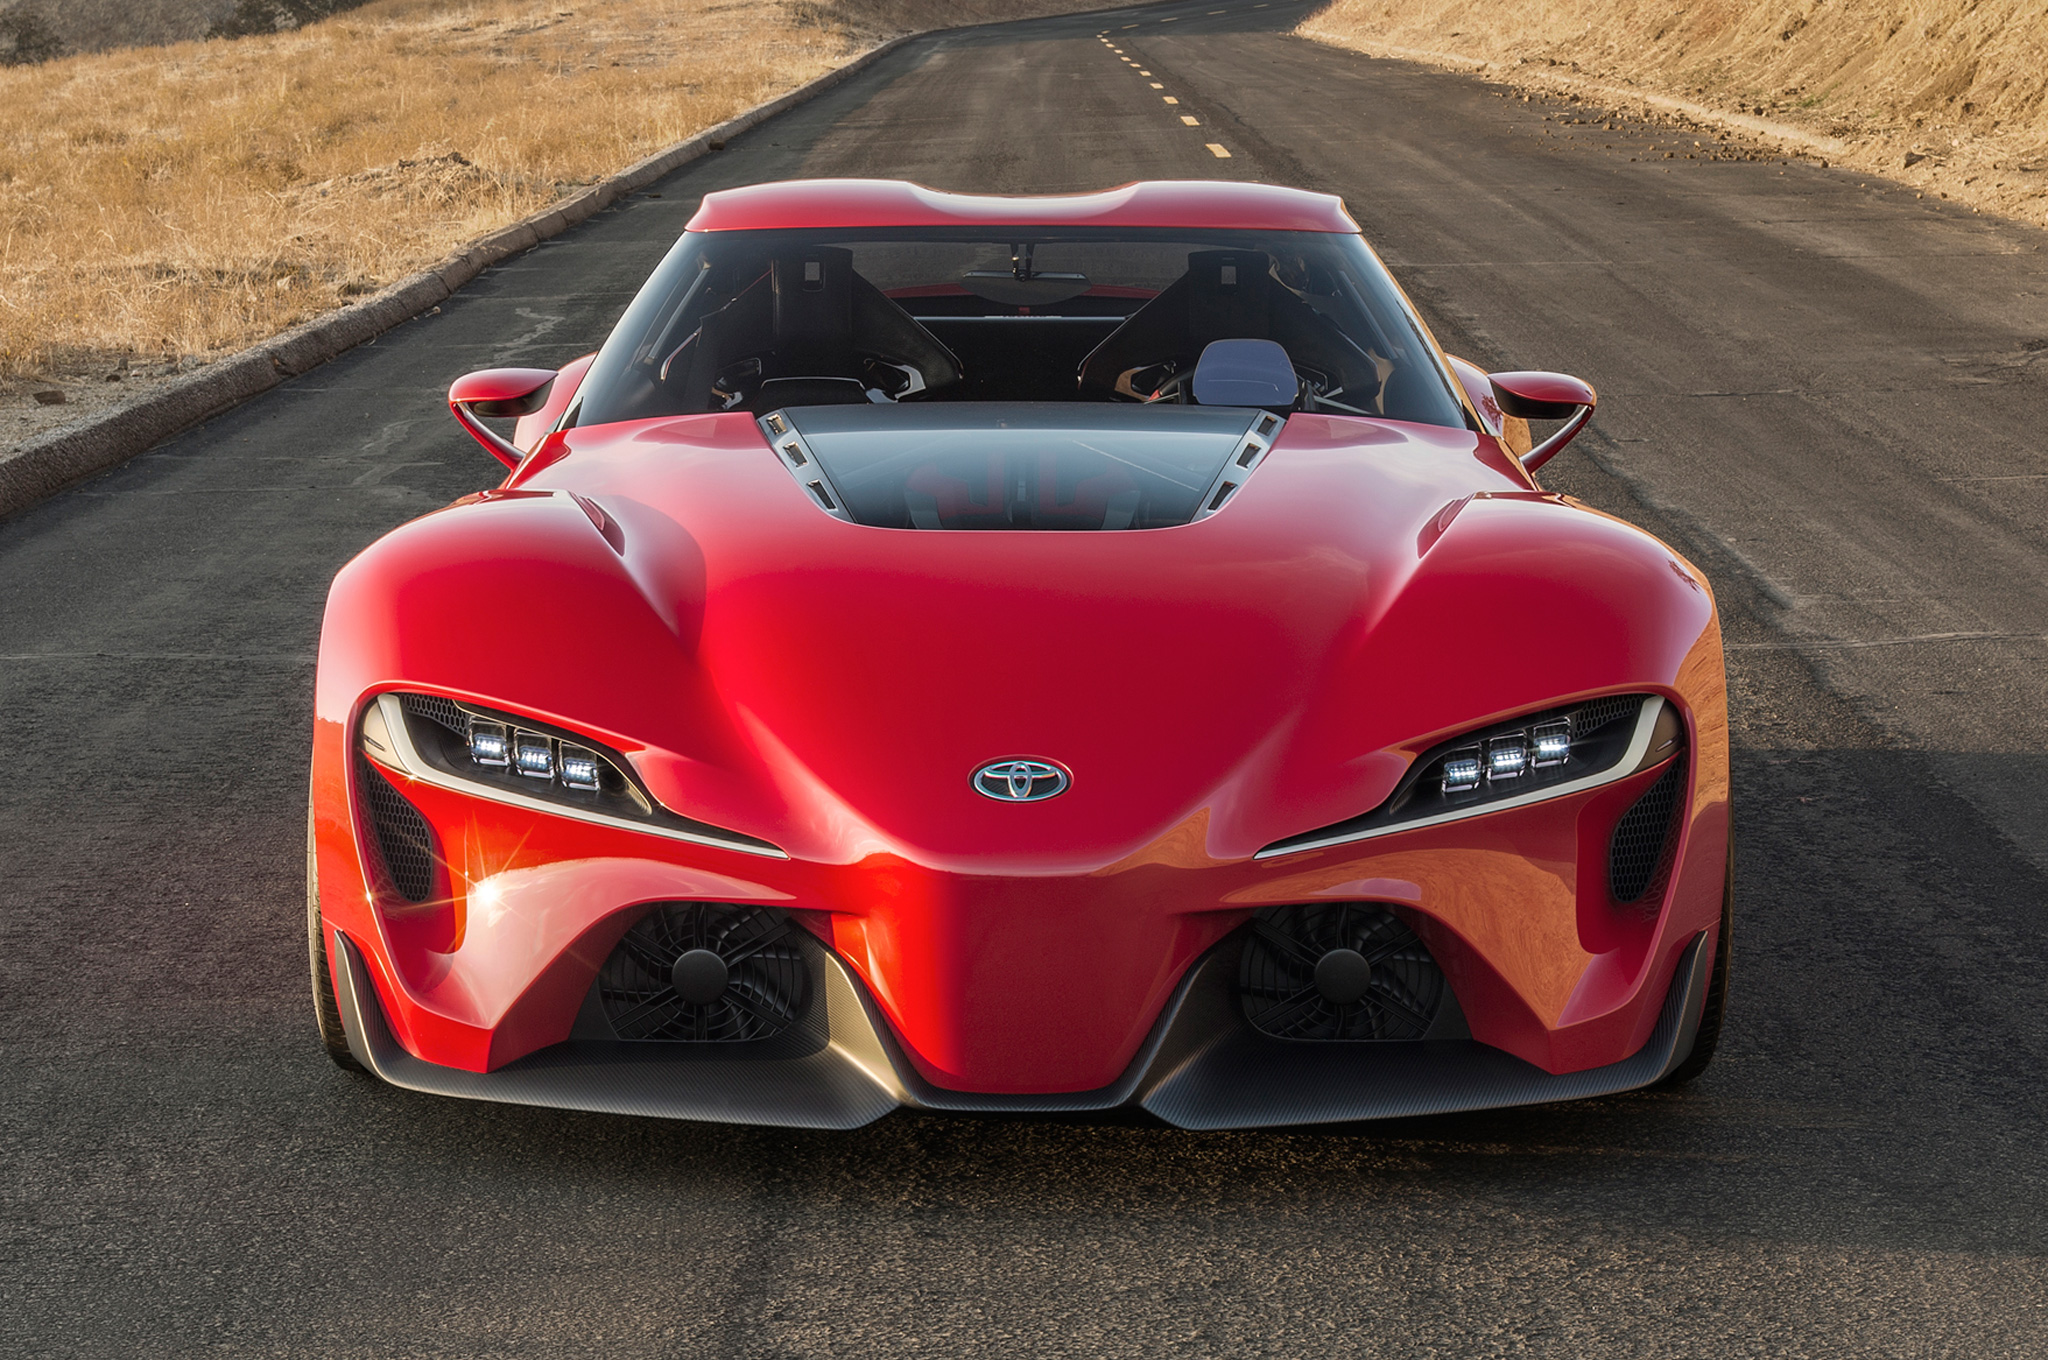 Toyota-FT-1-Concept-front-view-on-road.jpg